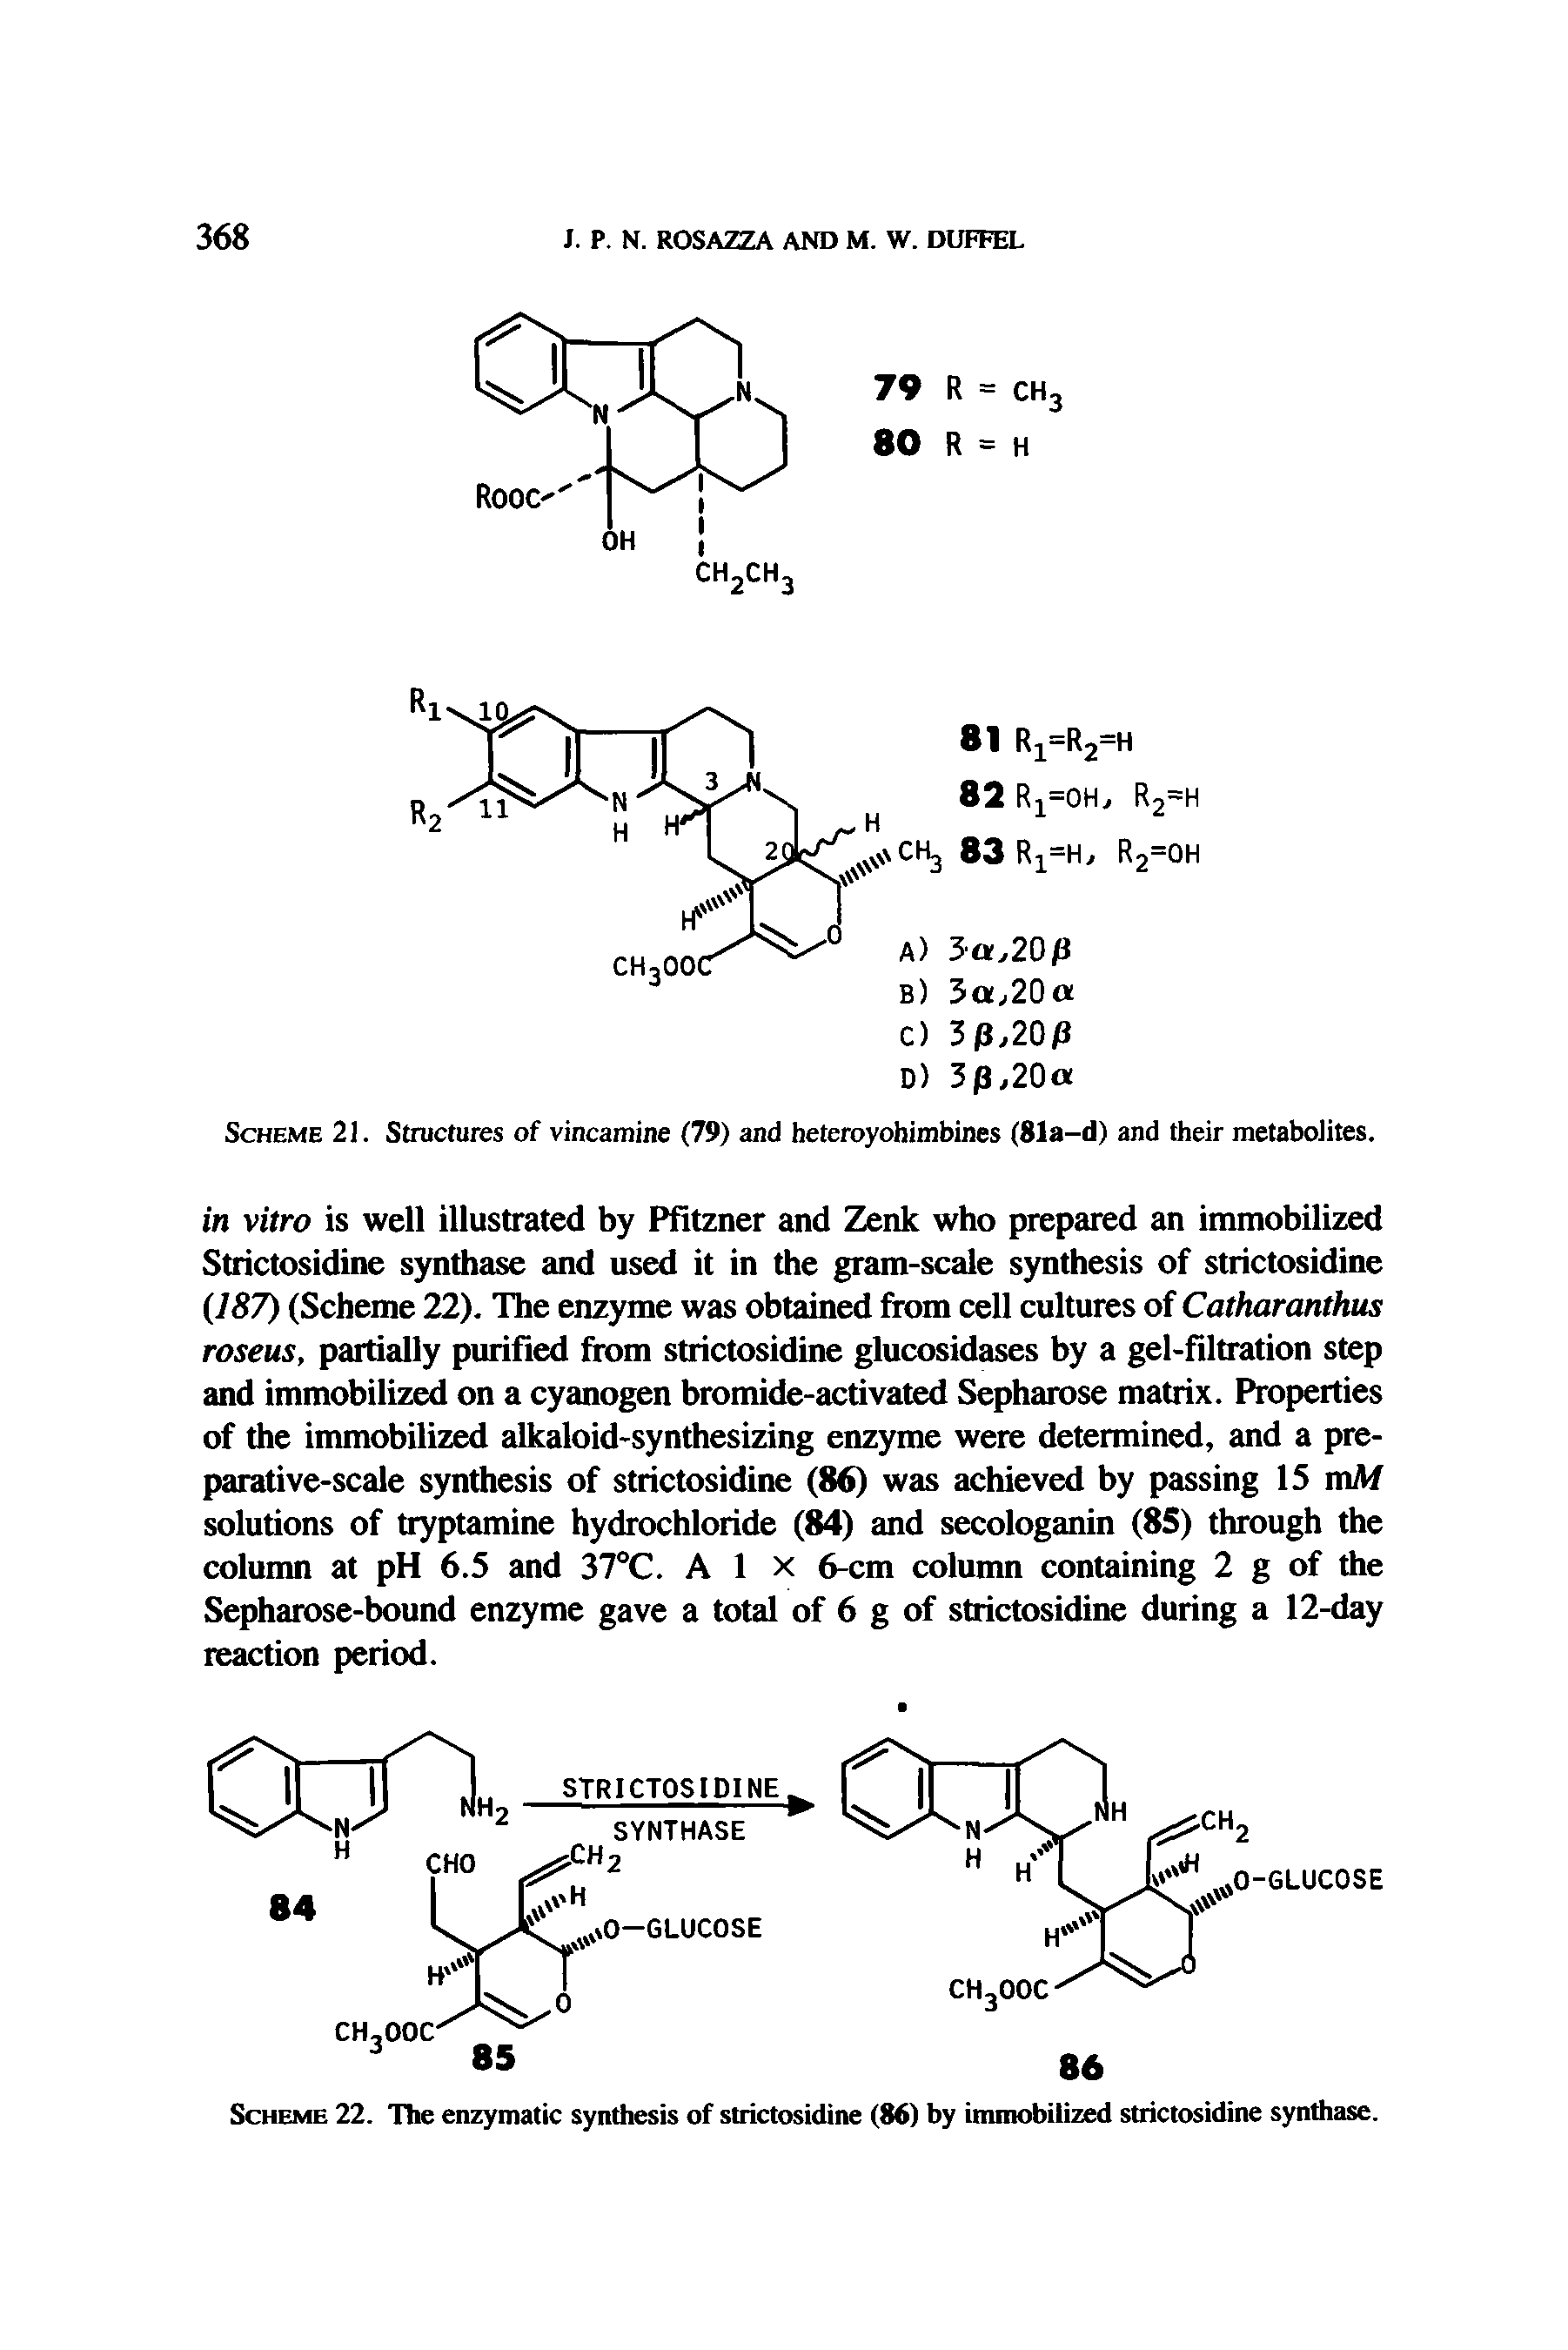 Scheme 22. The enzymatic synthesis of strictosidine (86) by immobilized strictosidine synthase.